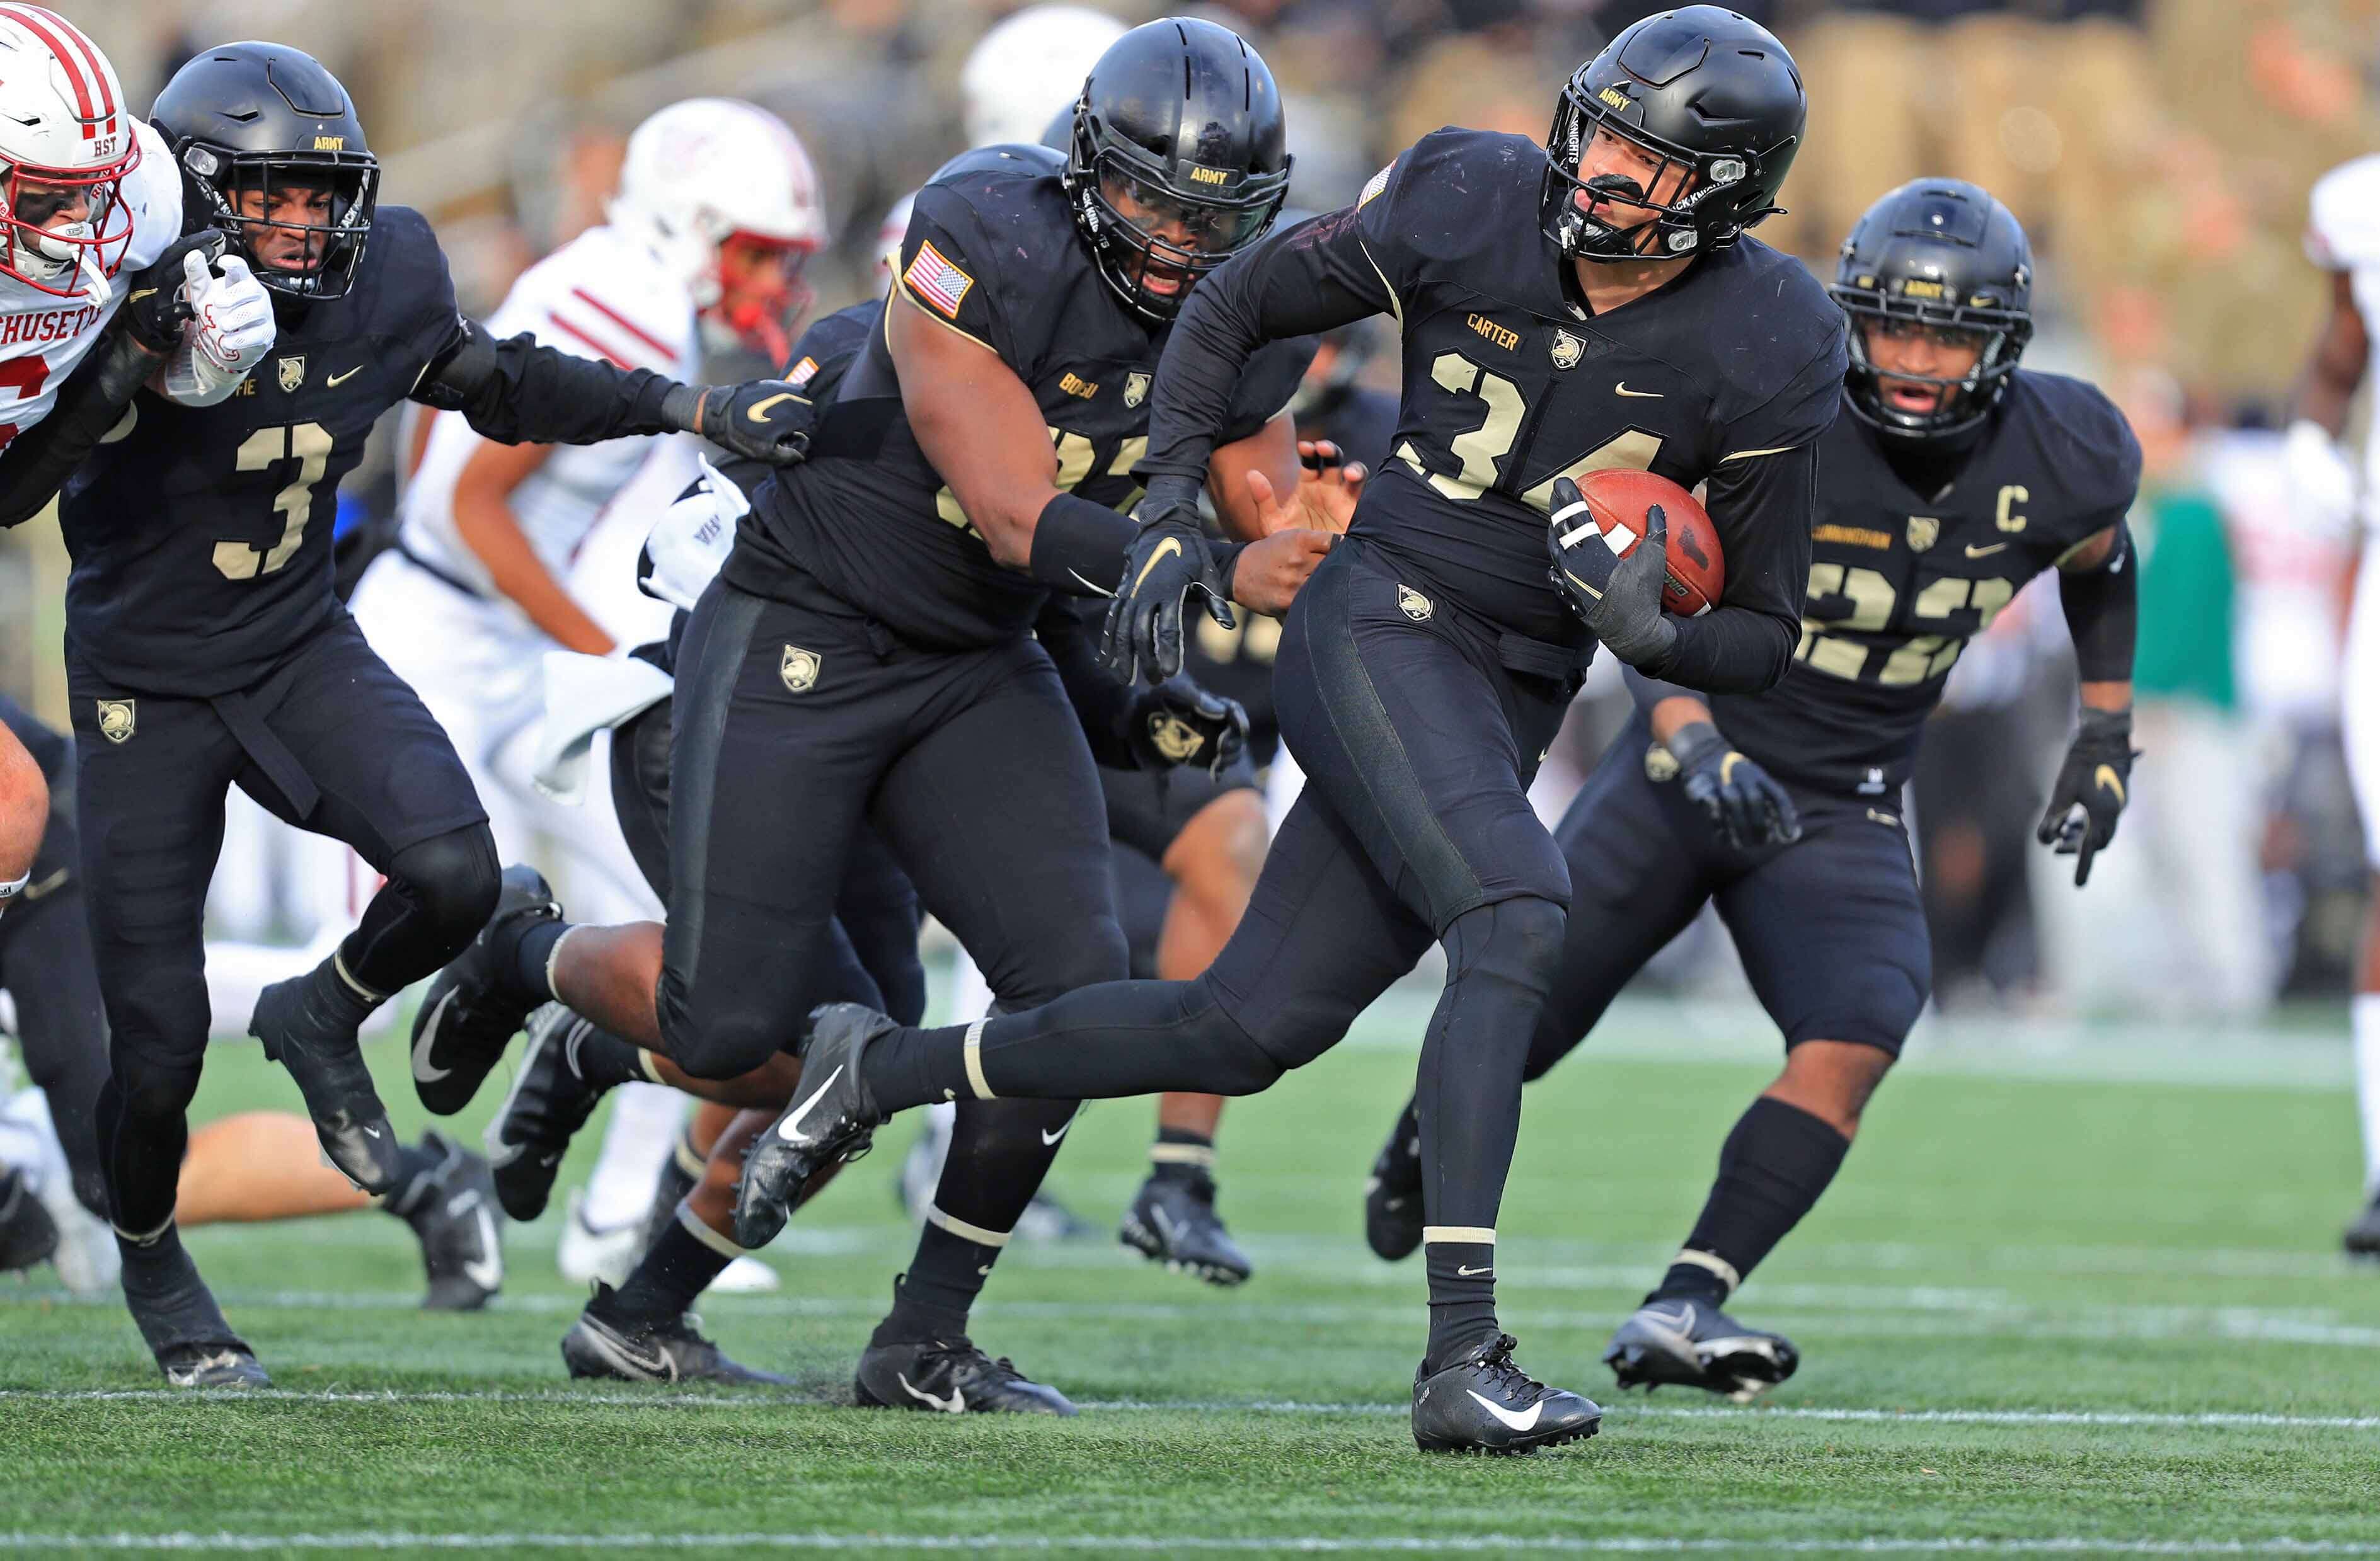 Army Black Knights outside linebacker Andre Carter (34) picks up a ball after a fumble that was later called back for a penalty against the Massachusetts Minutemen during the second half at Michie Stadium.